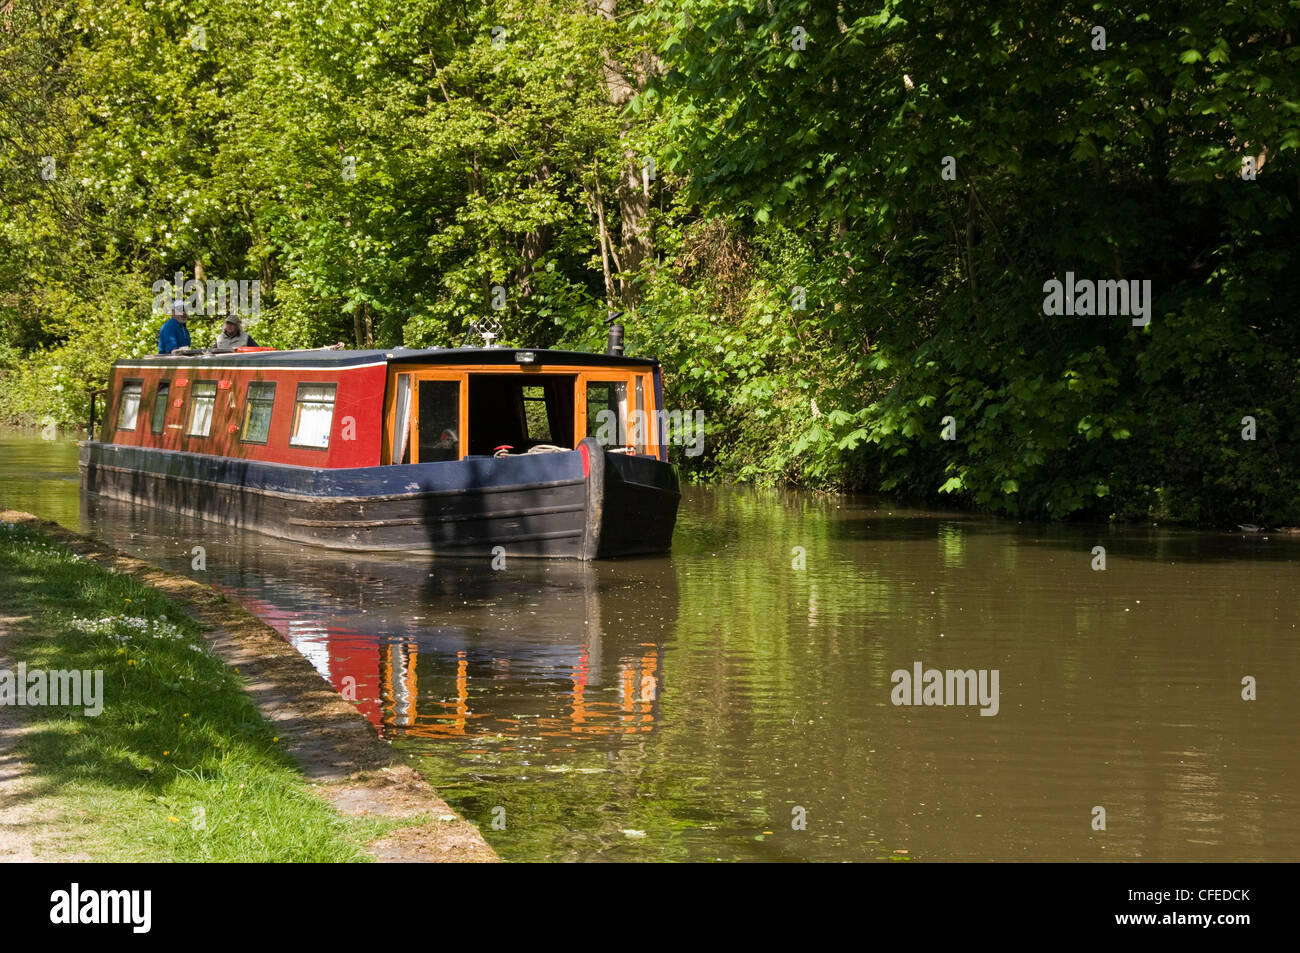 Narrowboat travelling along sunny scenic rural stretch of water (Leeds Liverpool Canal) with couple on board - Bingley, West Yorkshire, England, UK Stock Photo